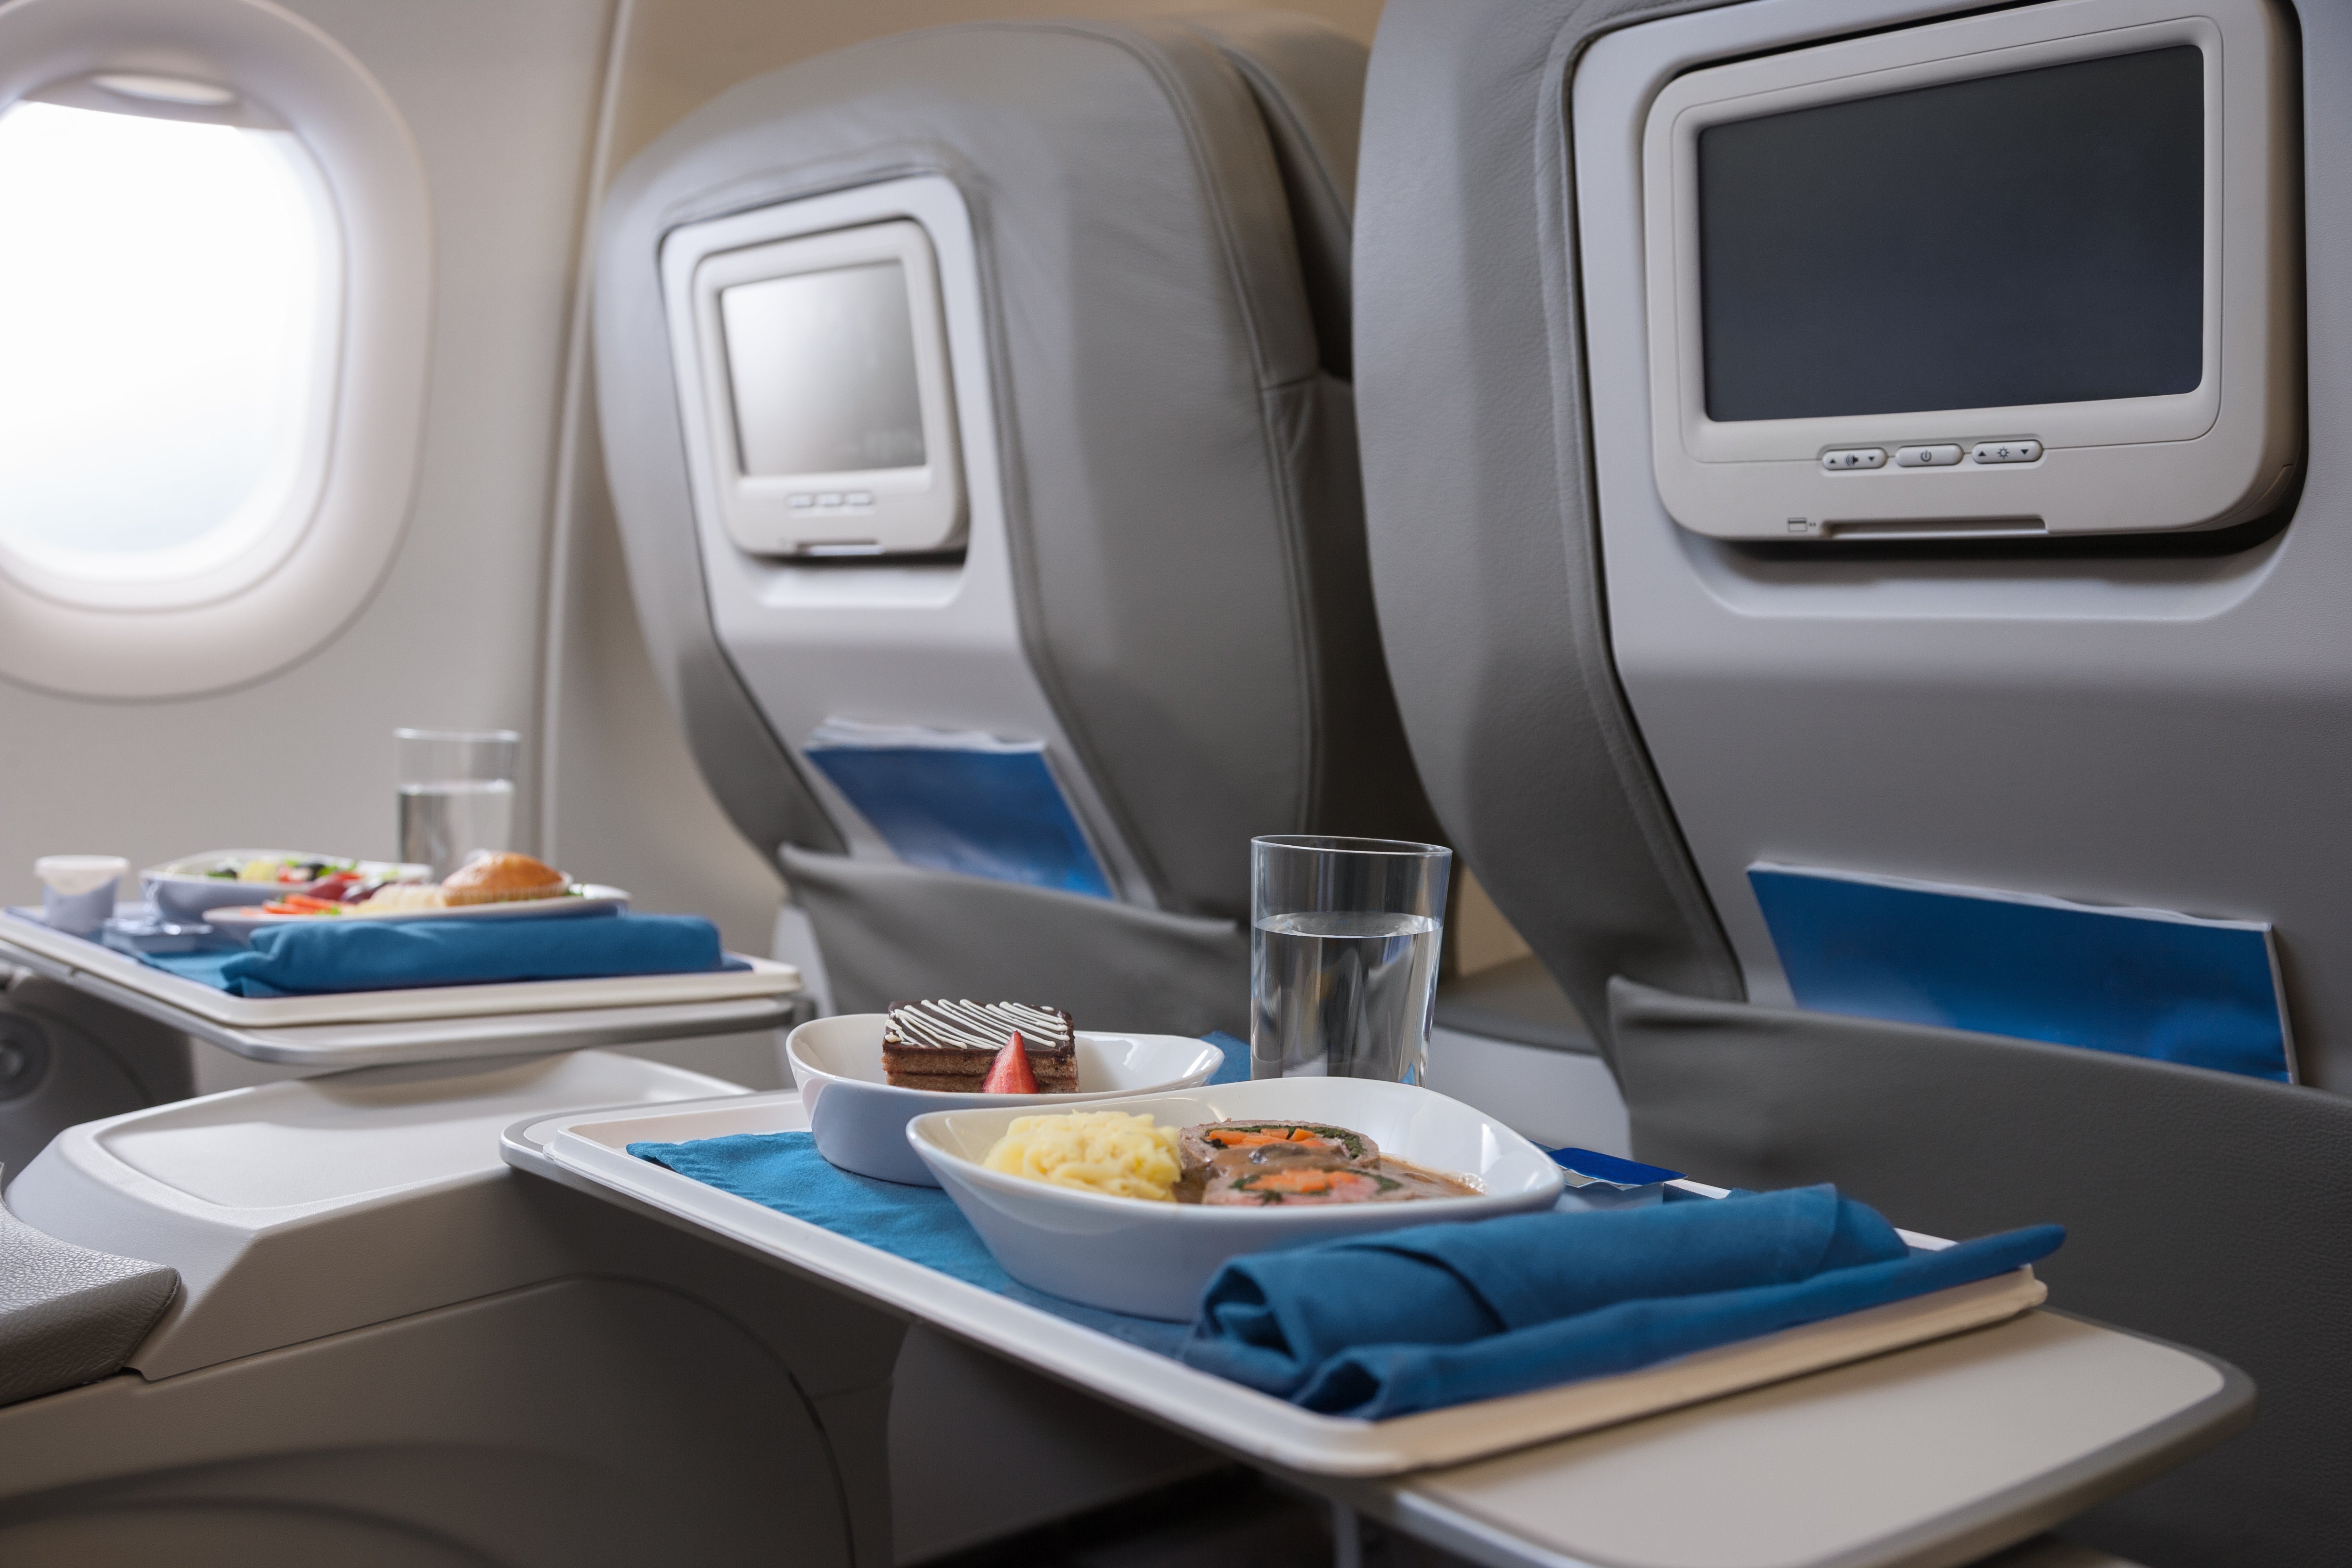 These Airlines Offer Free Meals (Not Just Snacks) On Their U.S. Flights
